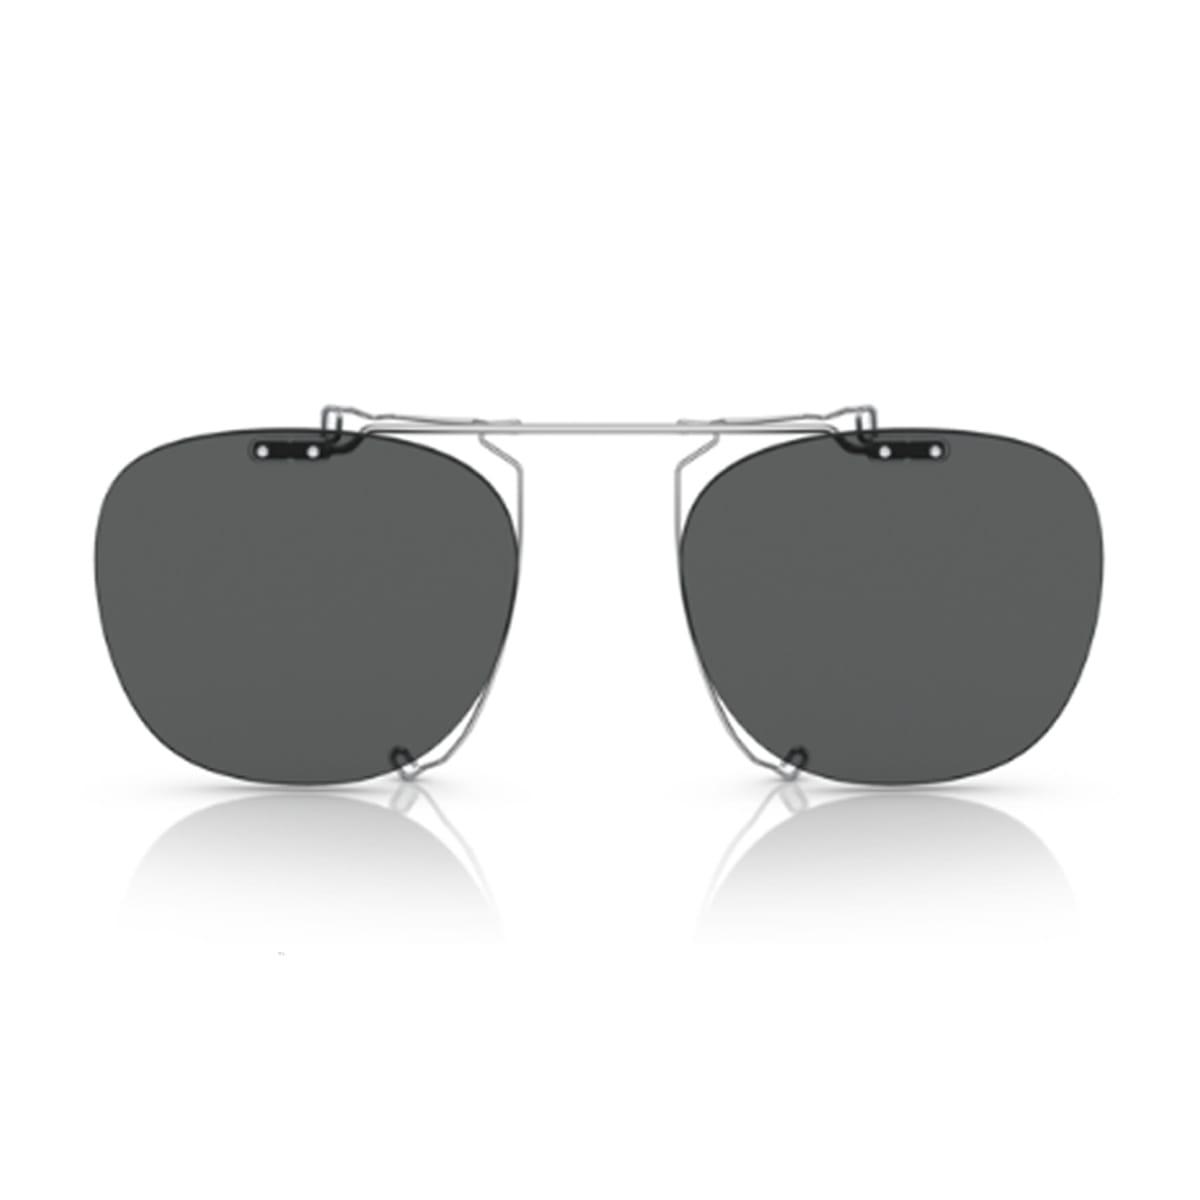 Oliver Peoples 0ov5491c - Finley 1993 Clip Sunglasses In 503681 Silver